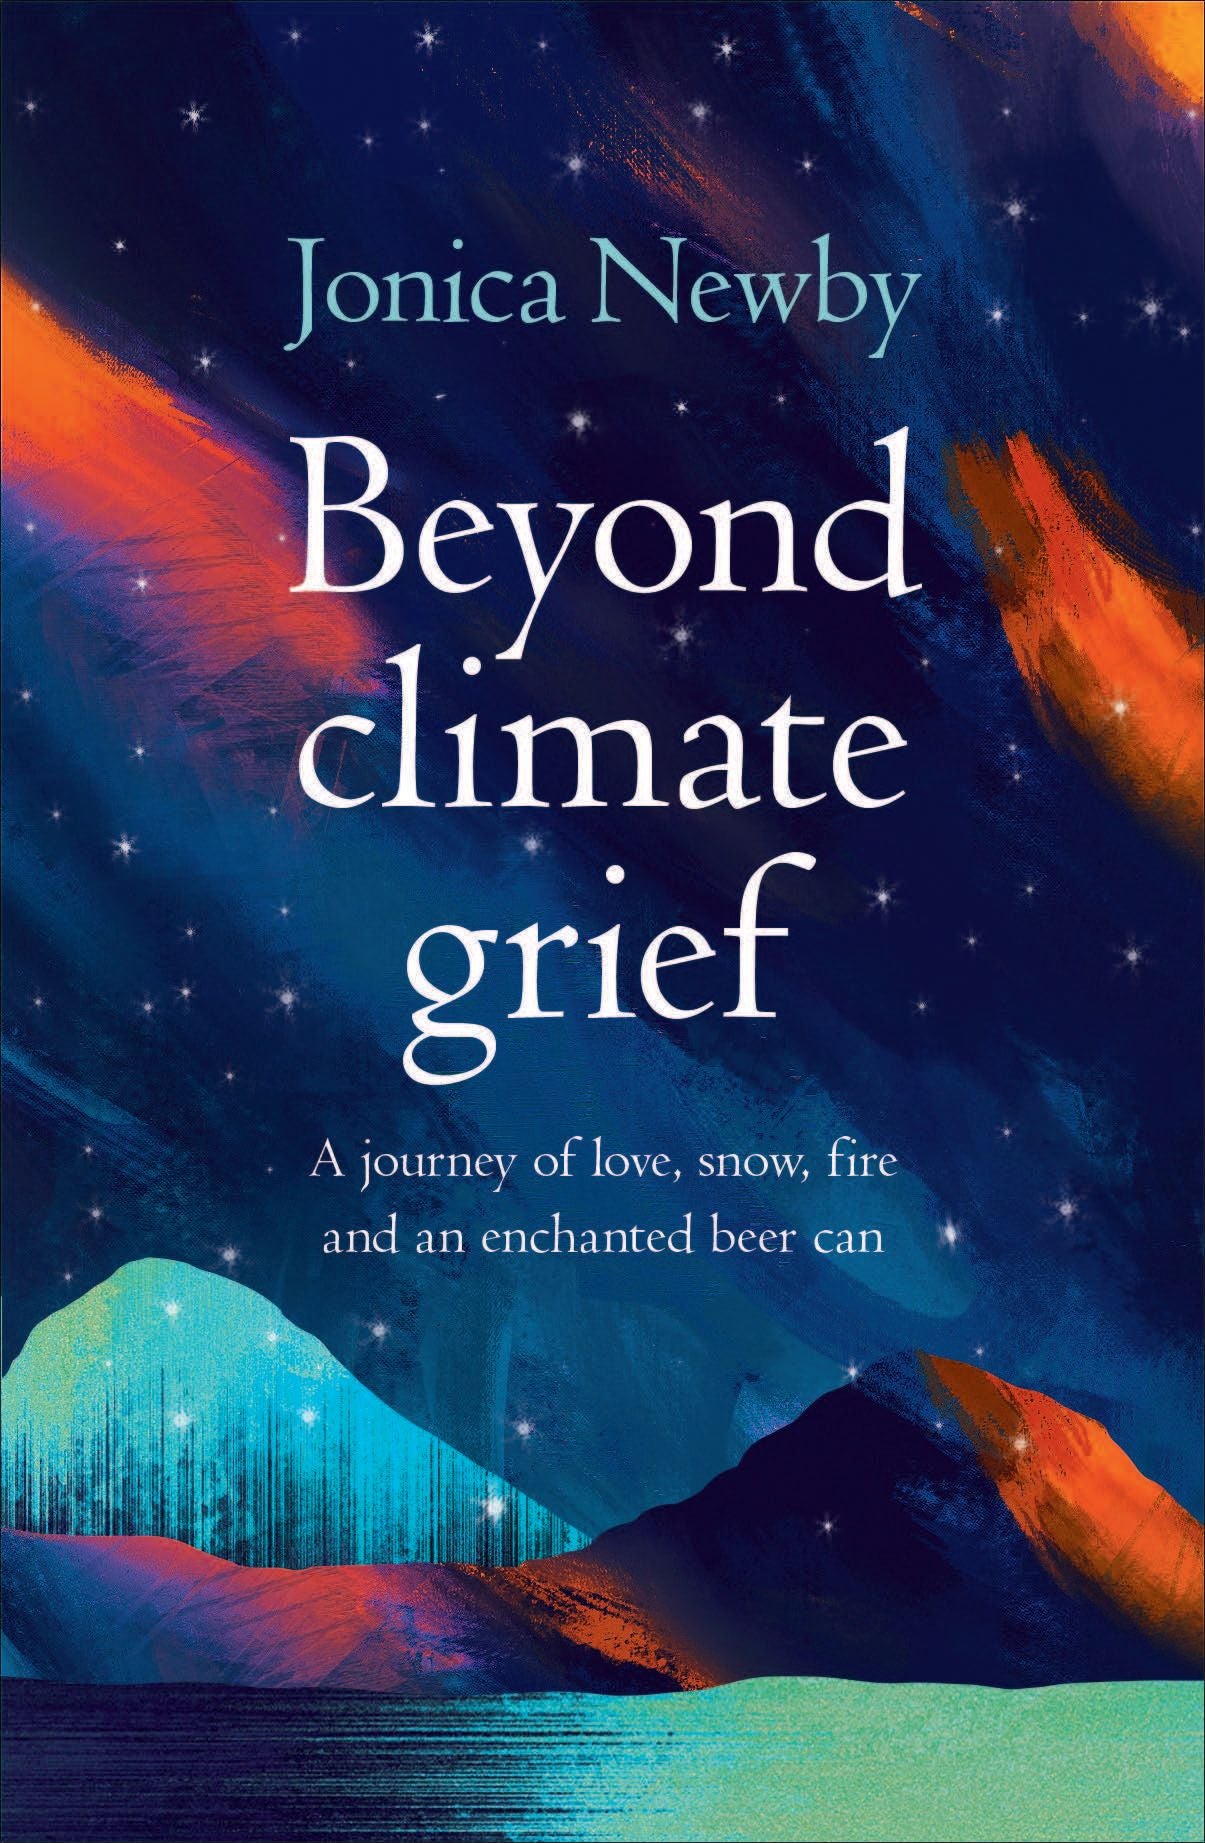 Beyond Climate Grief - Jonica Newby